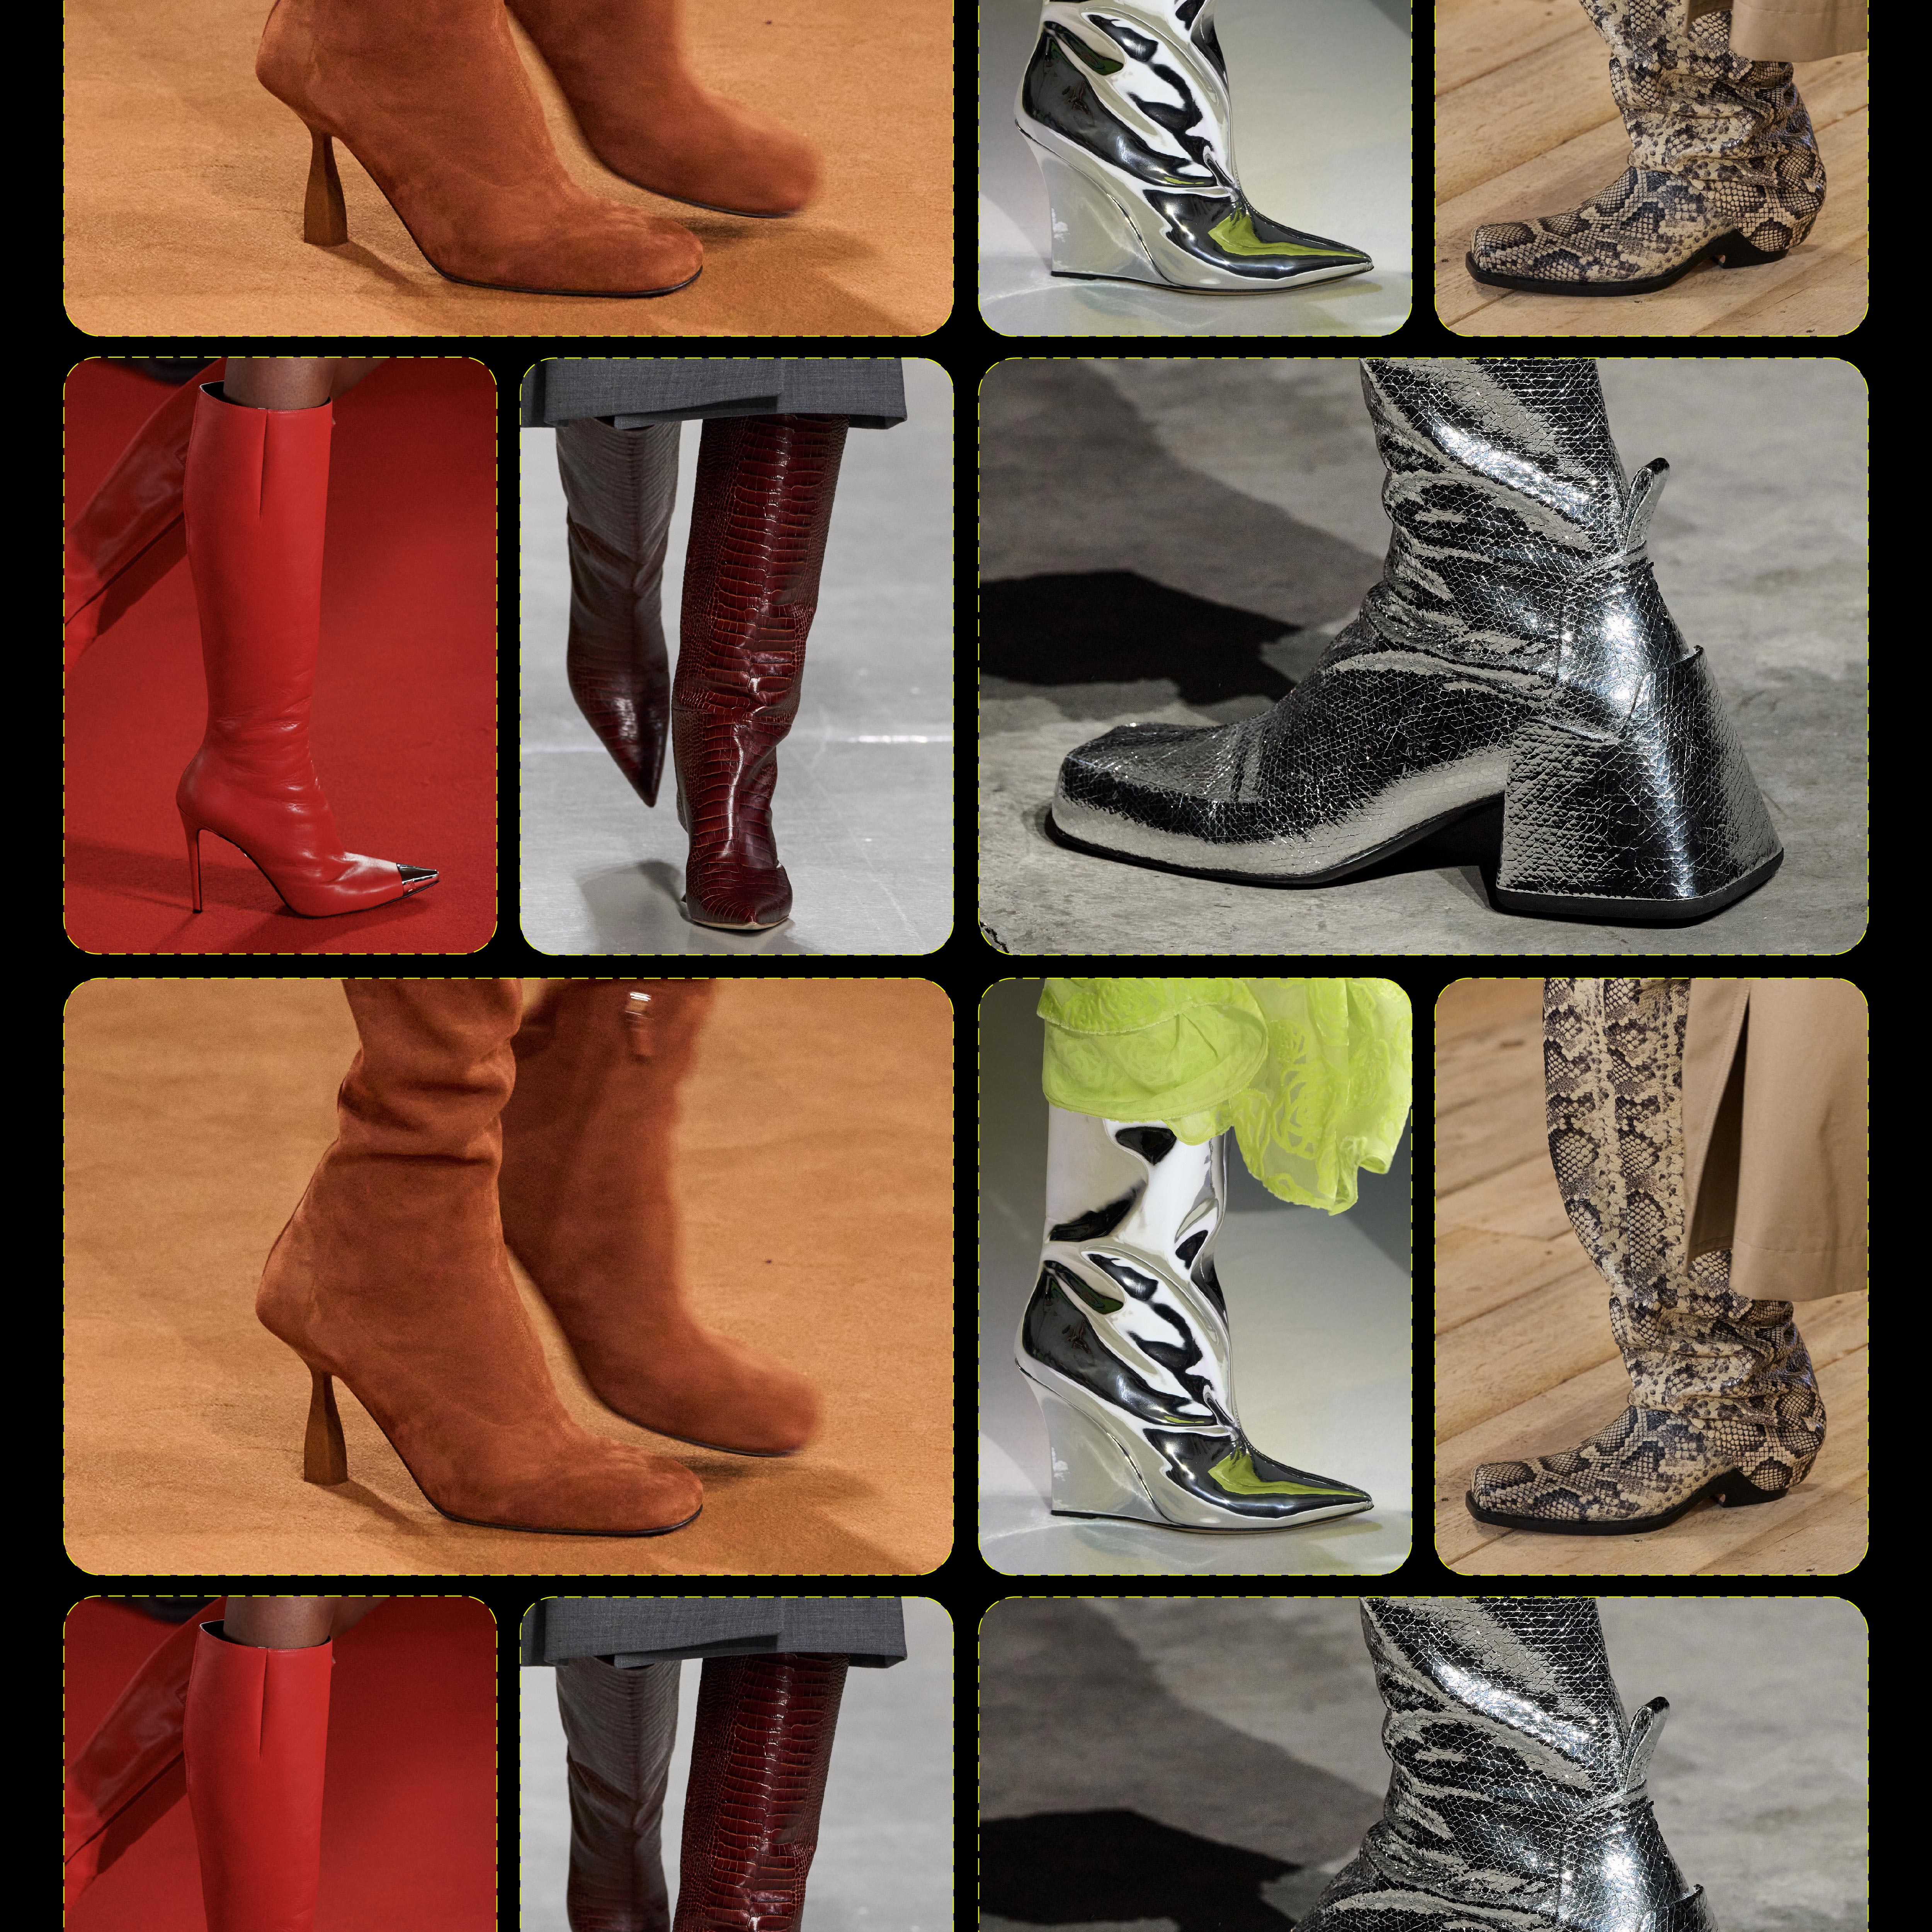 The Fall 2022 Boot Trends To Start Shopping Now